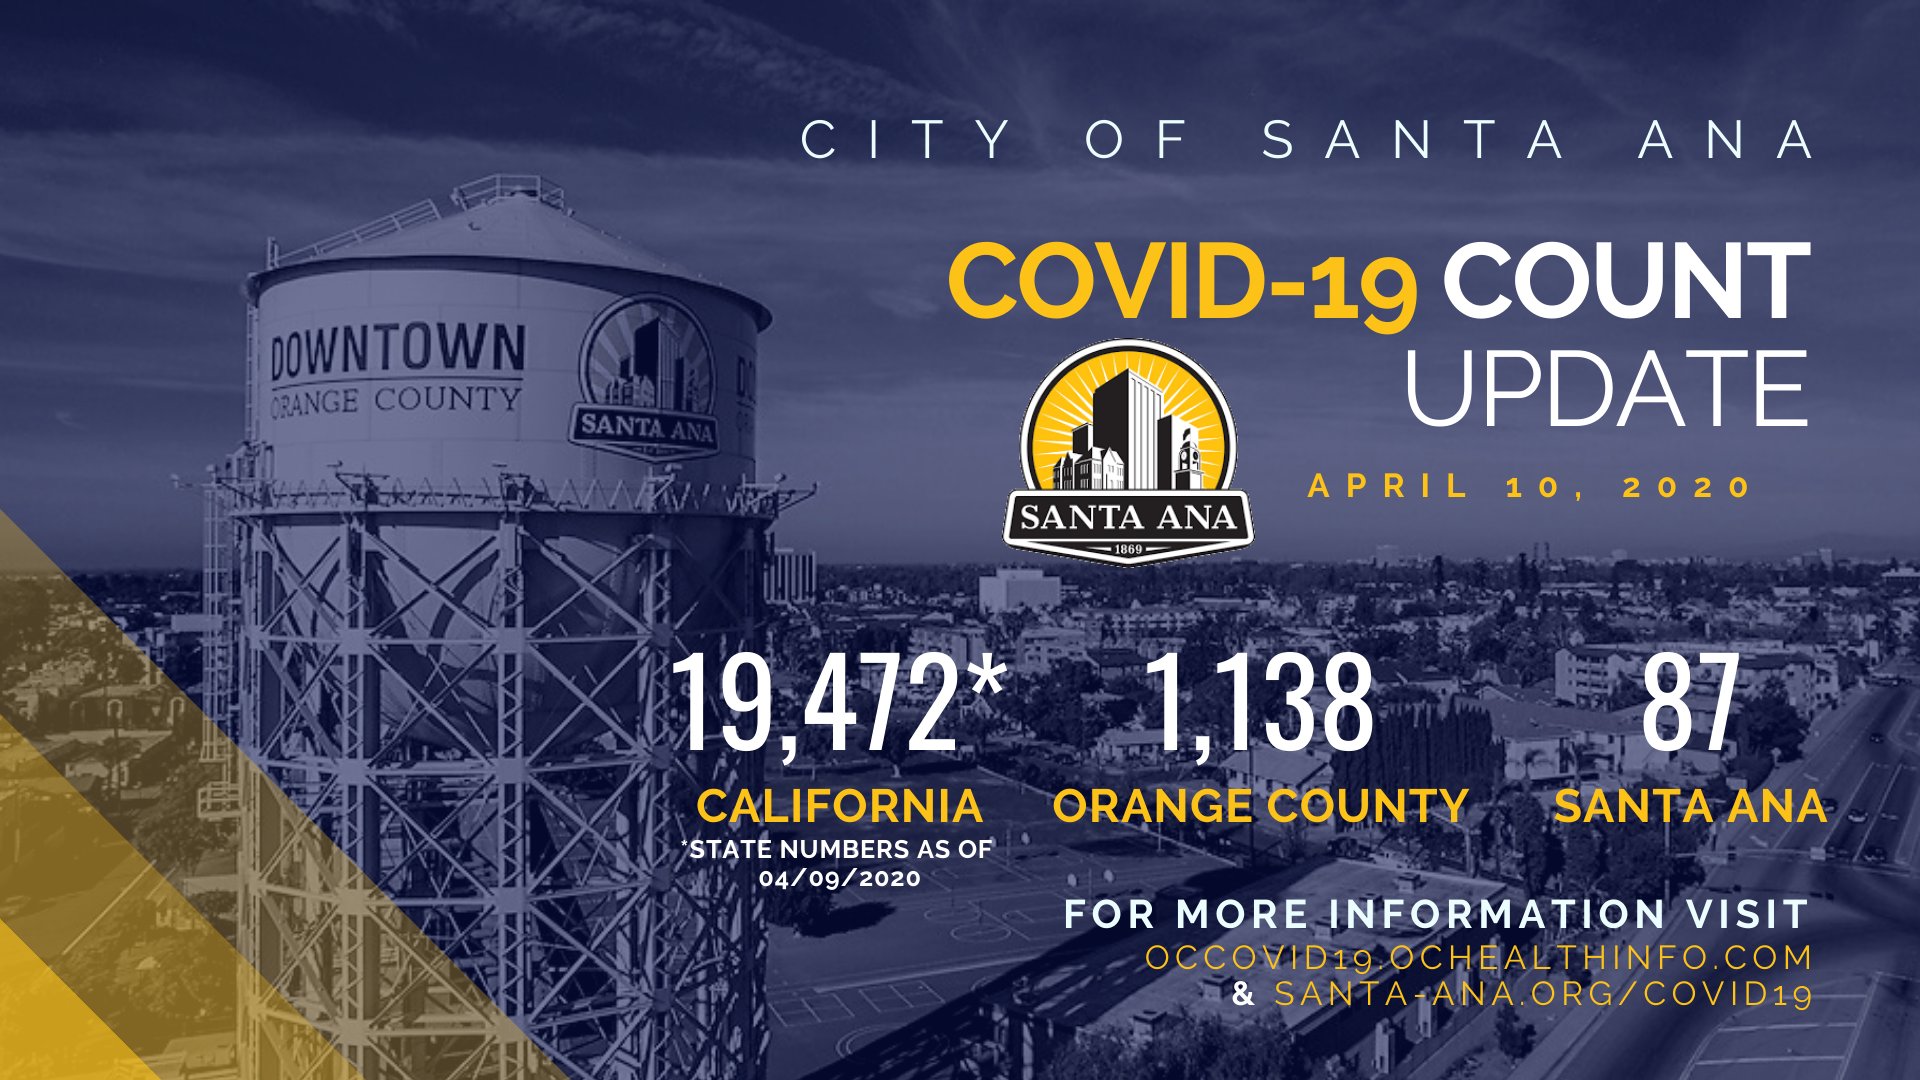 City Of Santa Ana Today The Oc Health Care Agency Reported 1 138 Confirmed Cases Of Covid 19 In Orange County And 87 Cases In Santa Ana For More Go To T Co Lzecca0aks